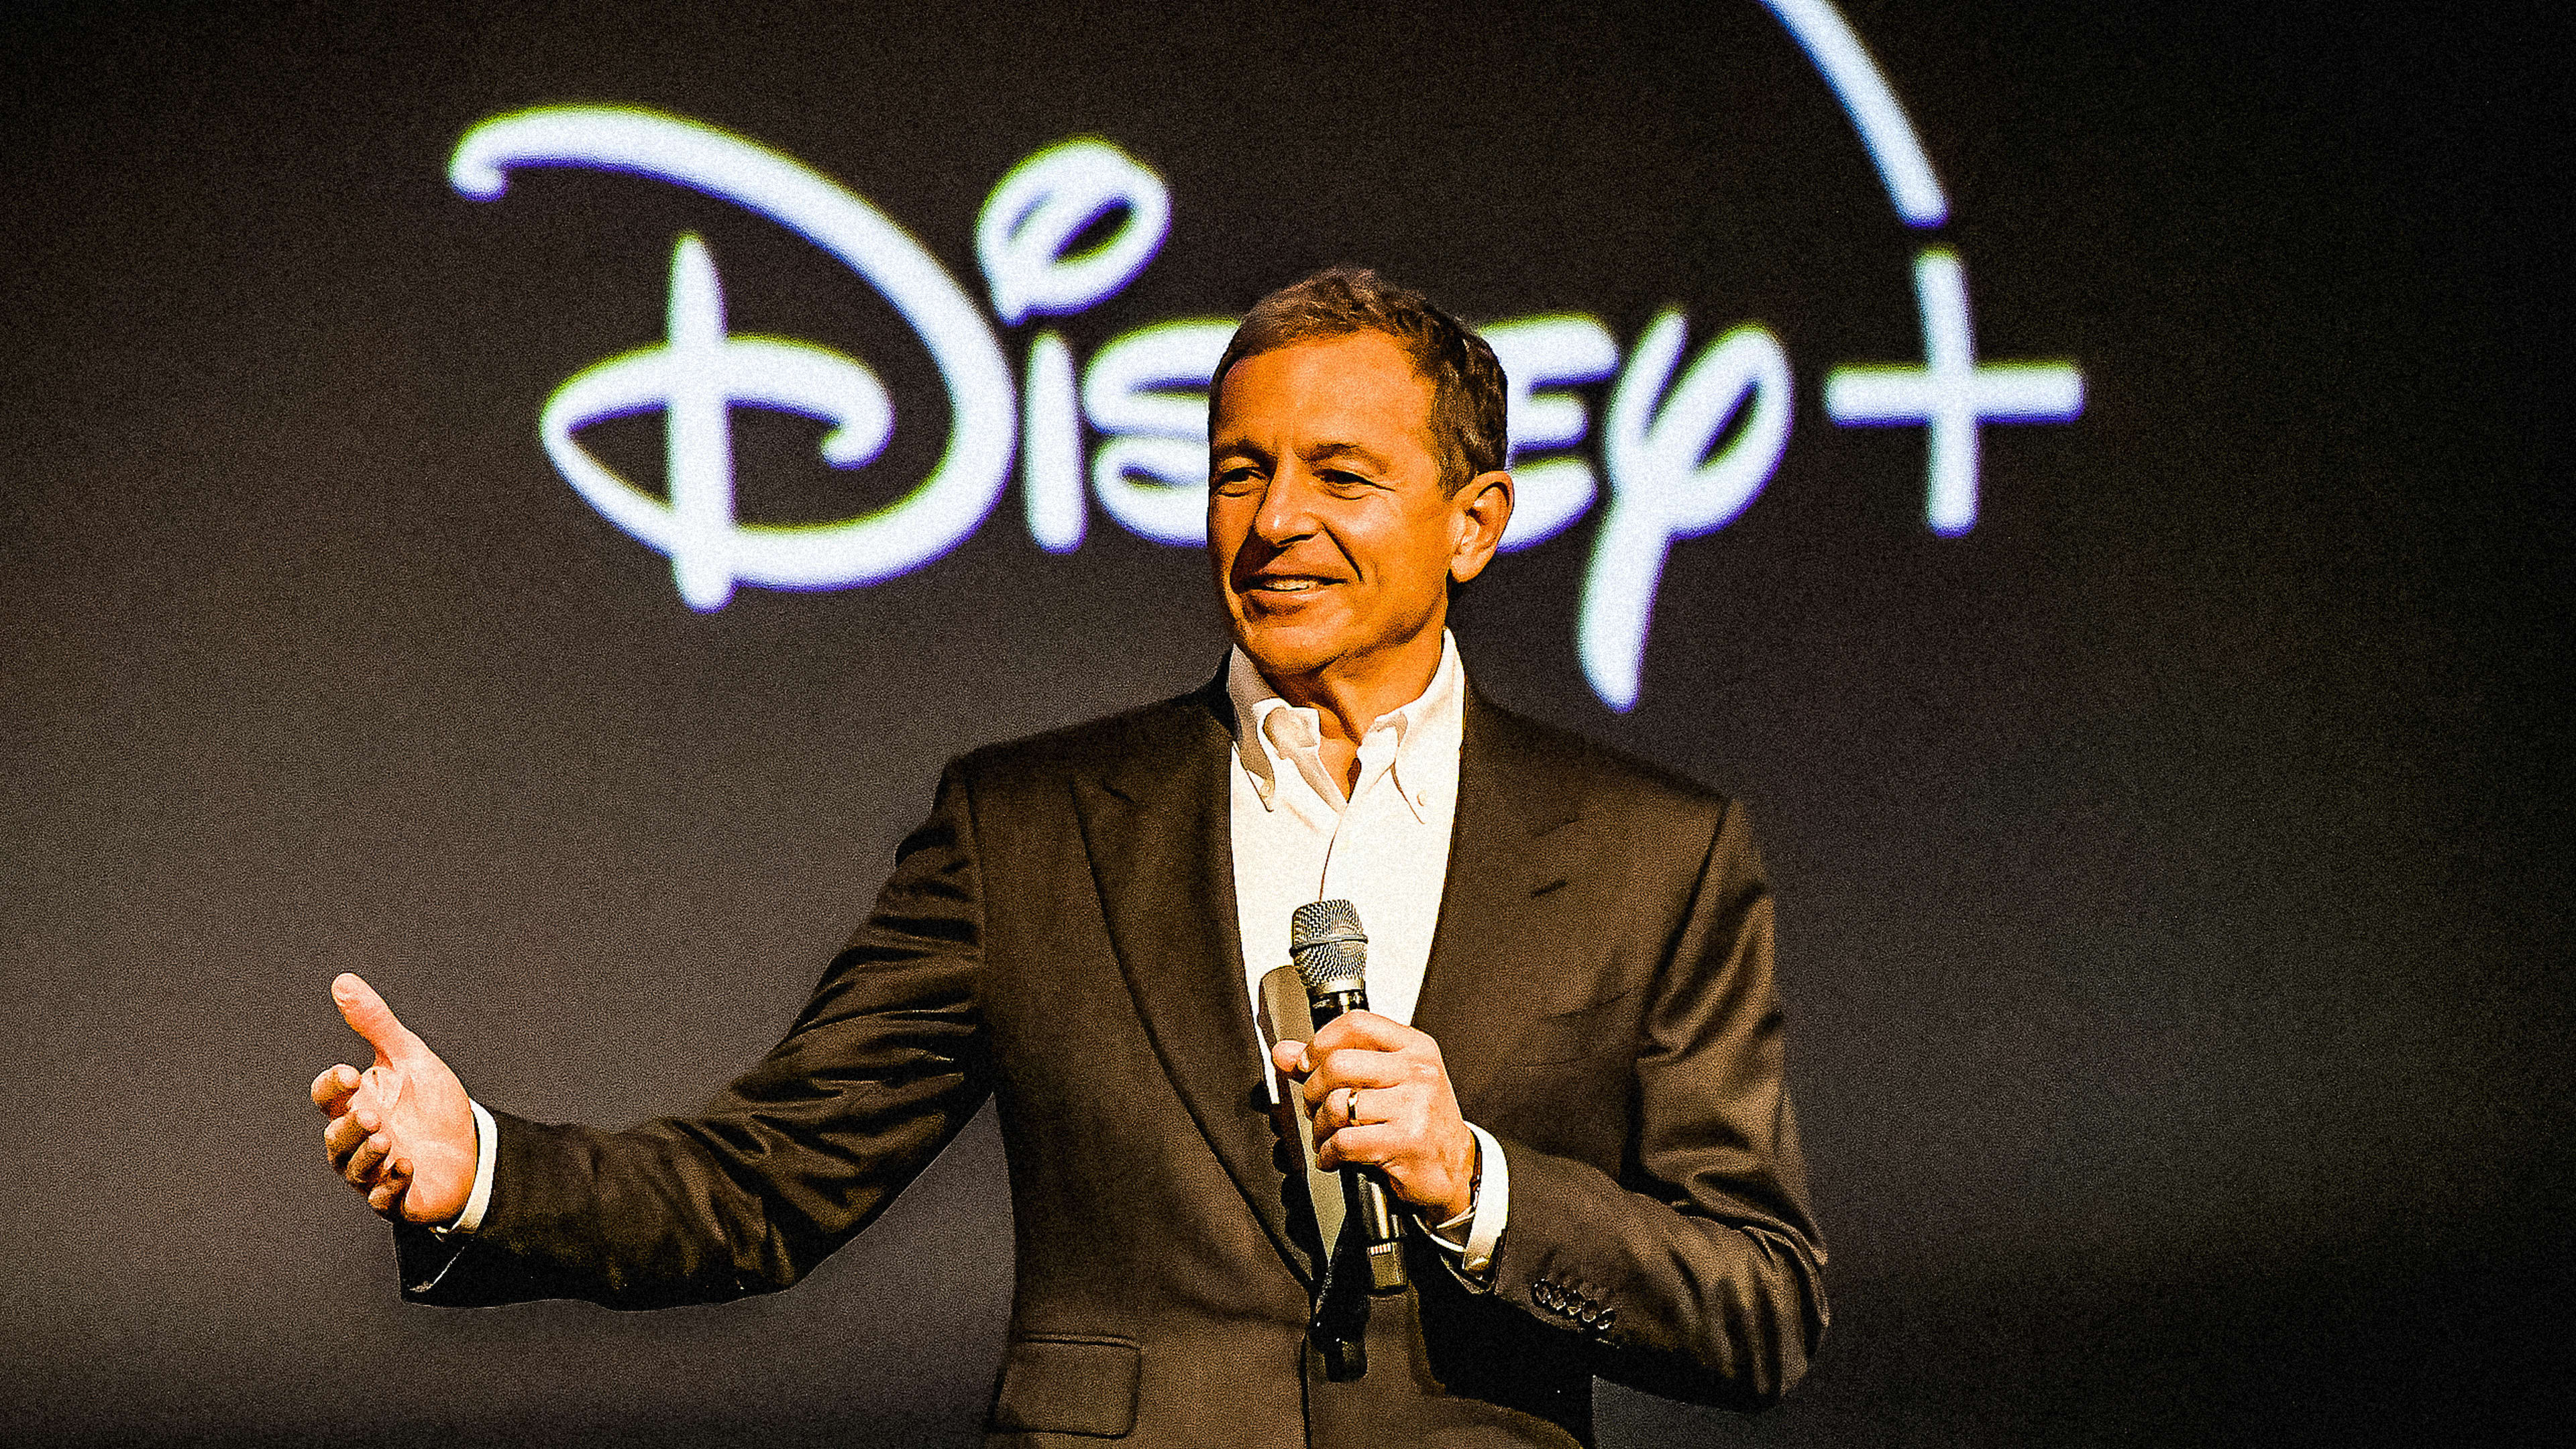 Which recent Disney moves could Bob Iger reverse?